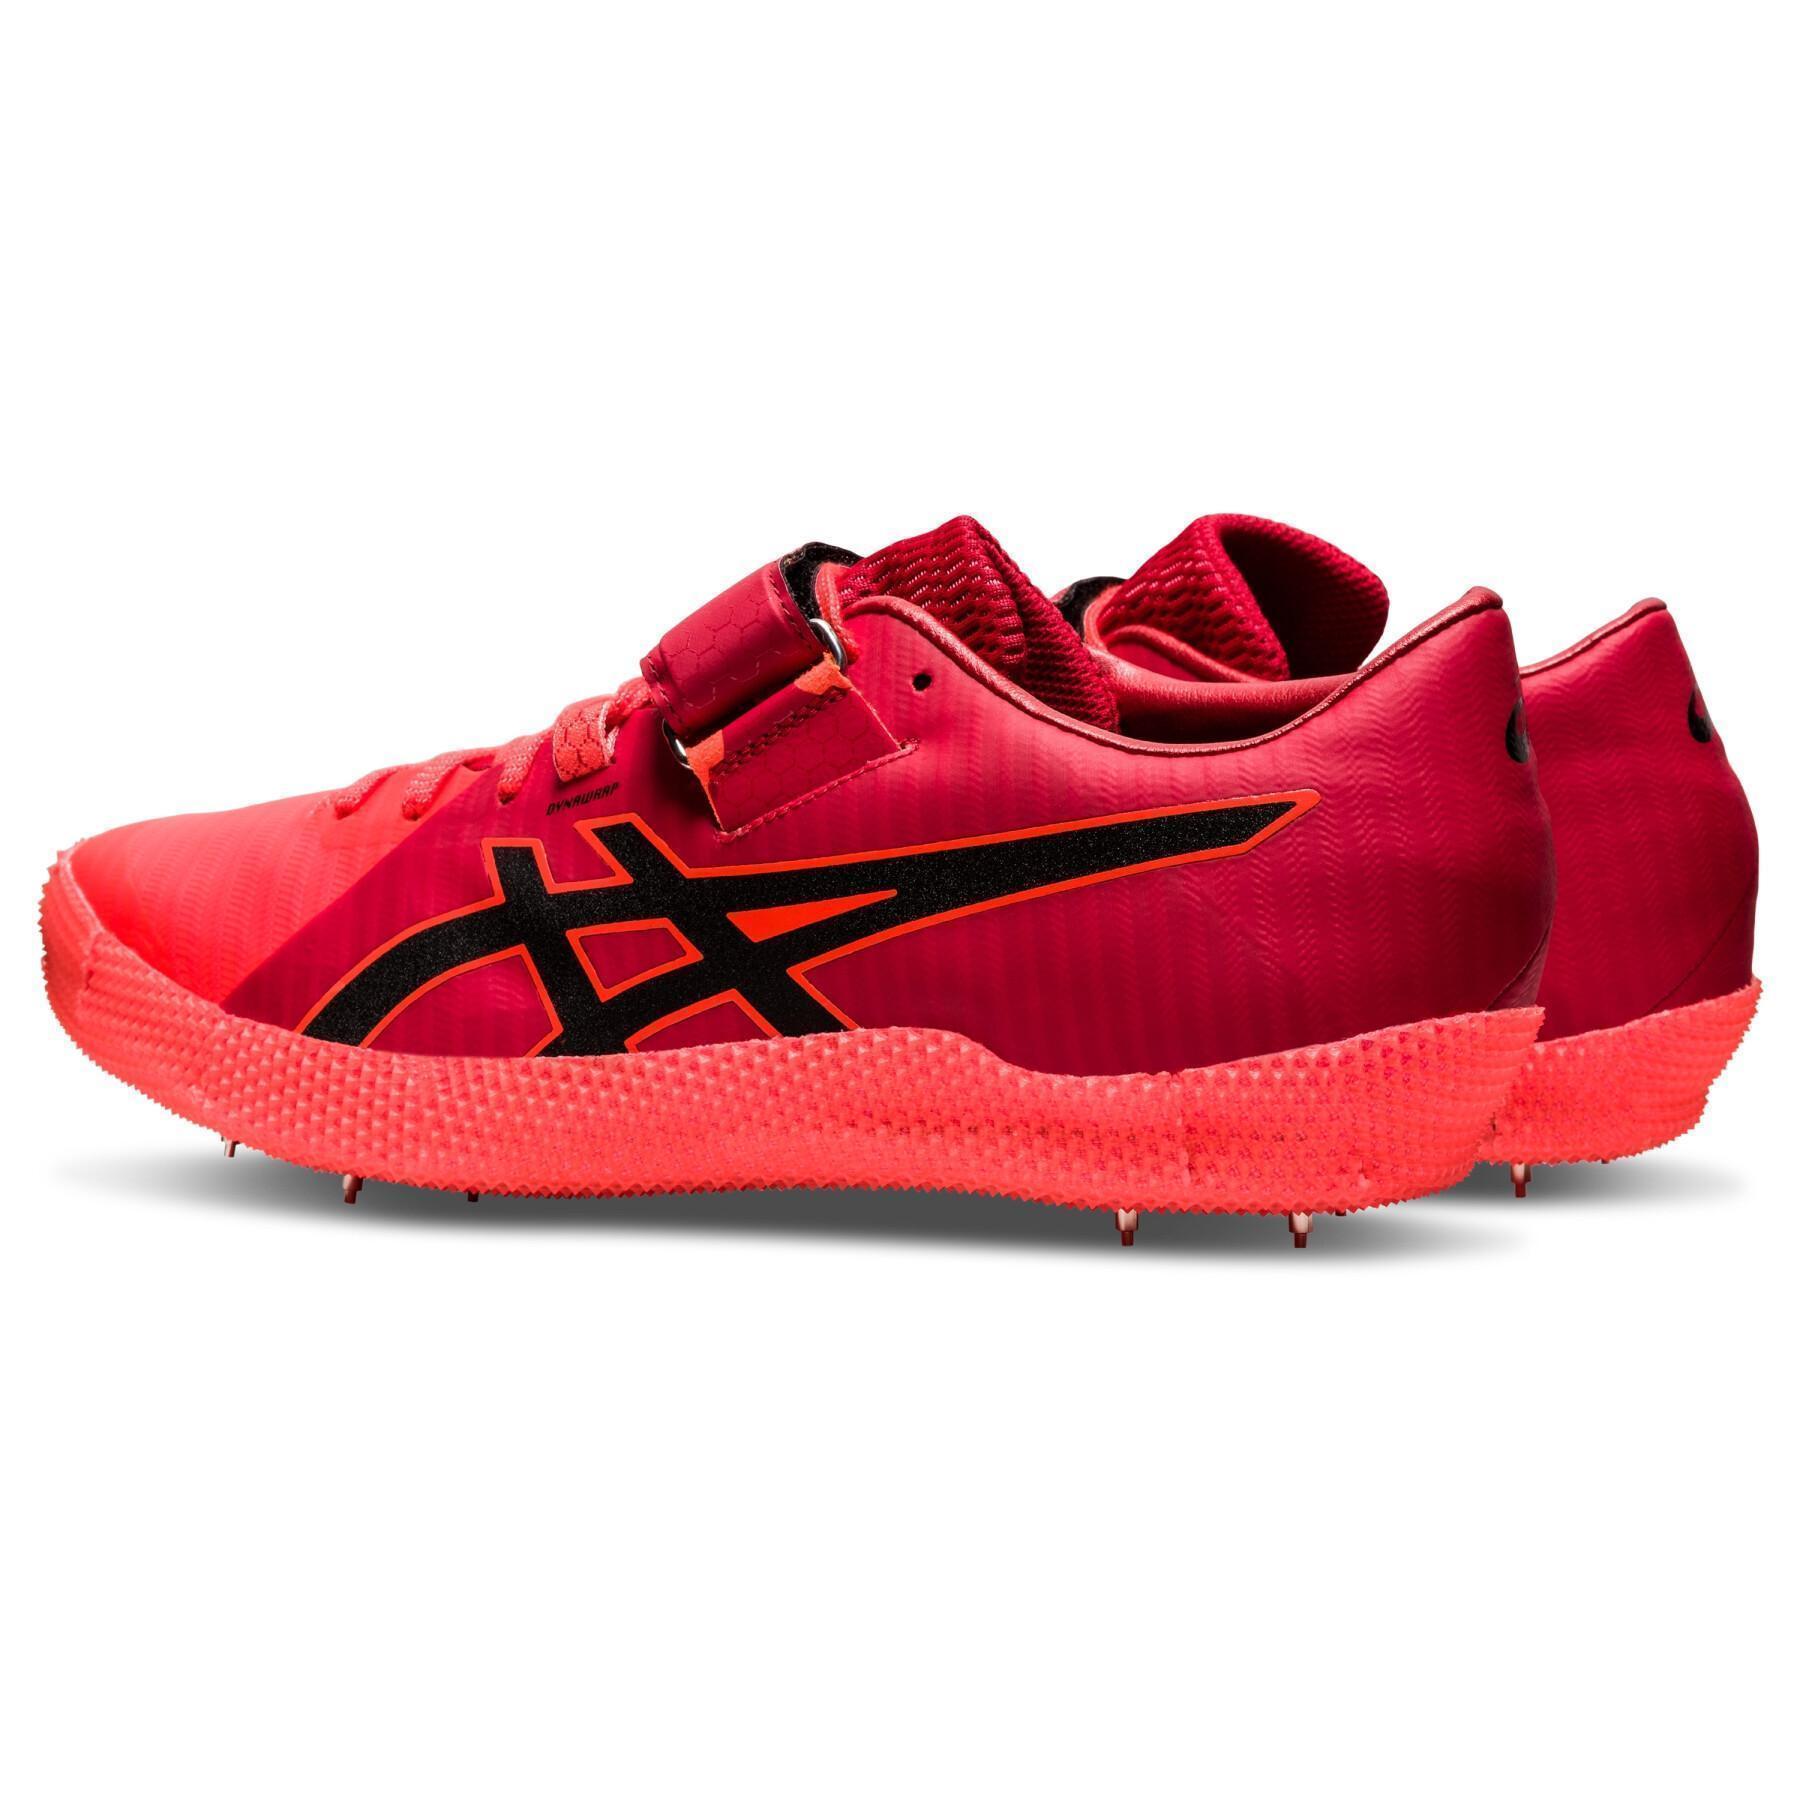 Athletic shoes Asics High Jump Pro 2 (R)